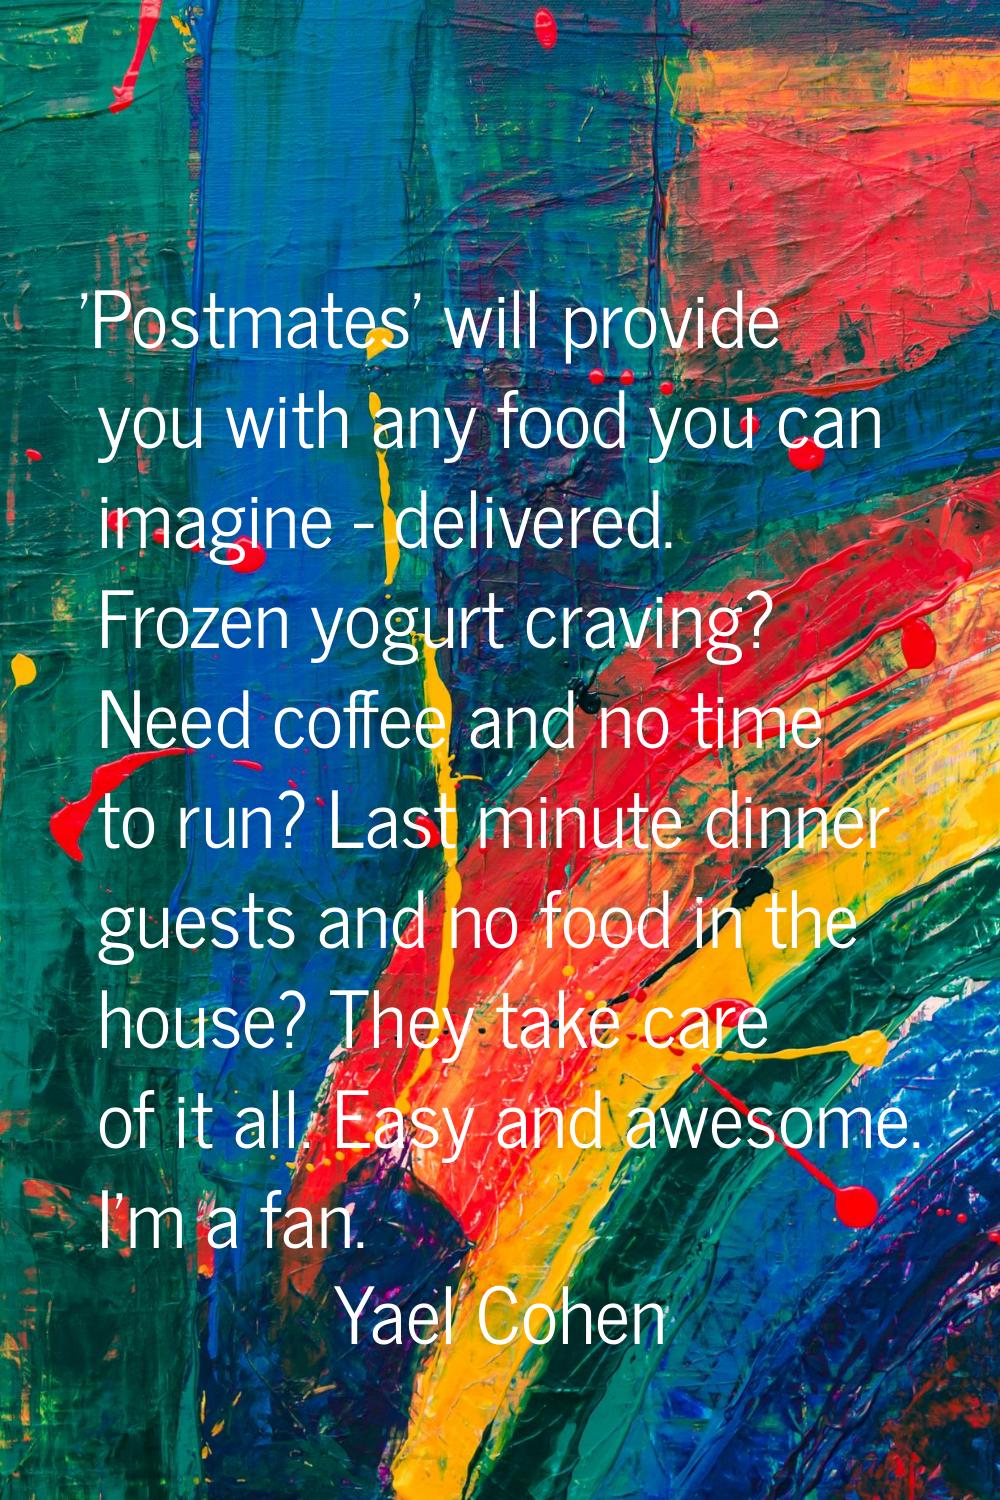 'Postmates' will provide you with any food you can imagine - delivered. Frozen yogurt craving? Need